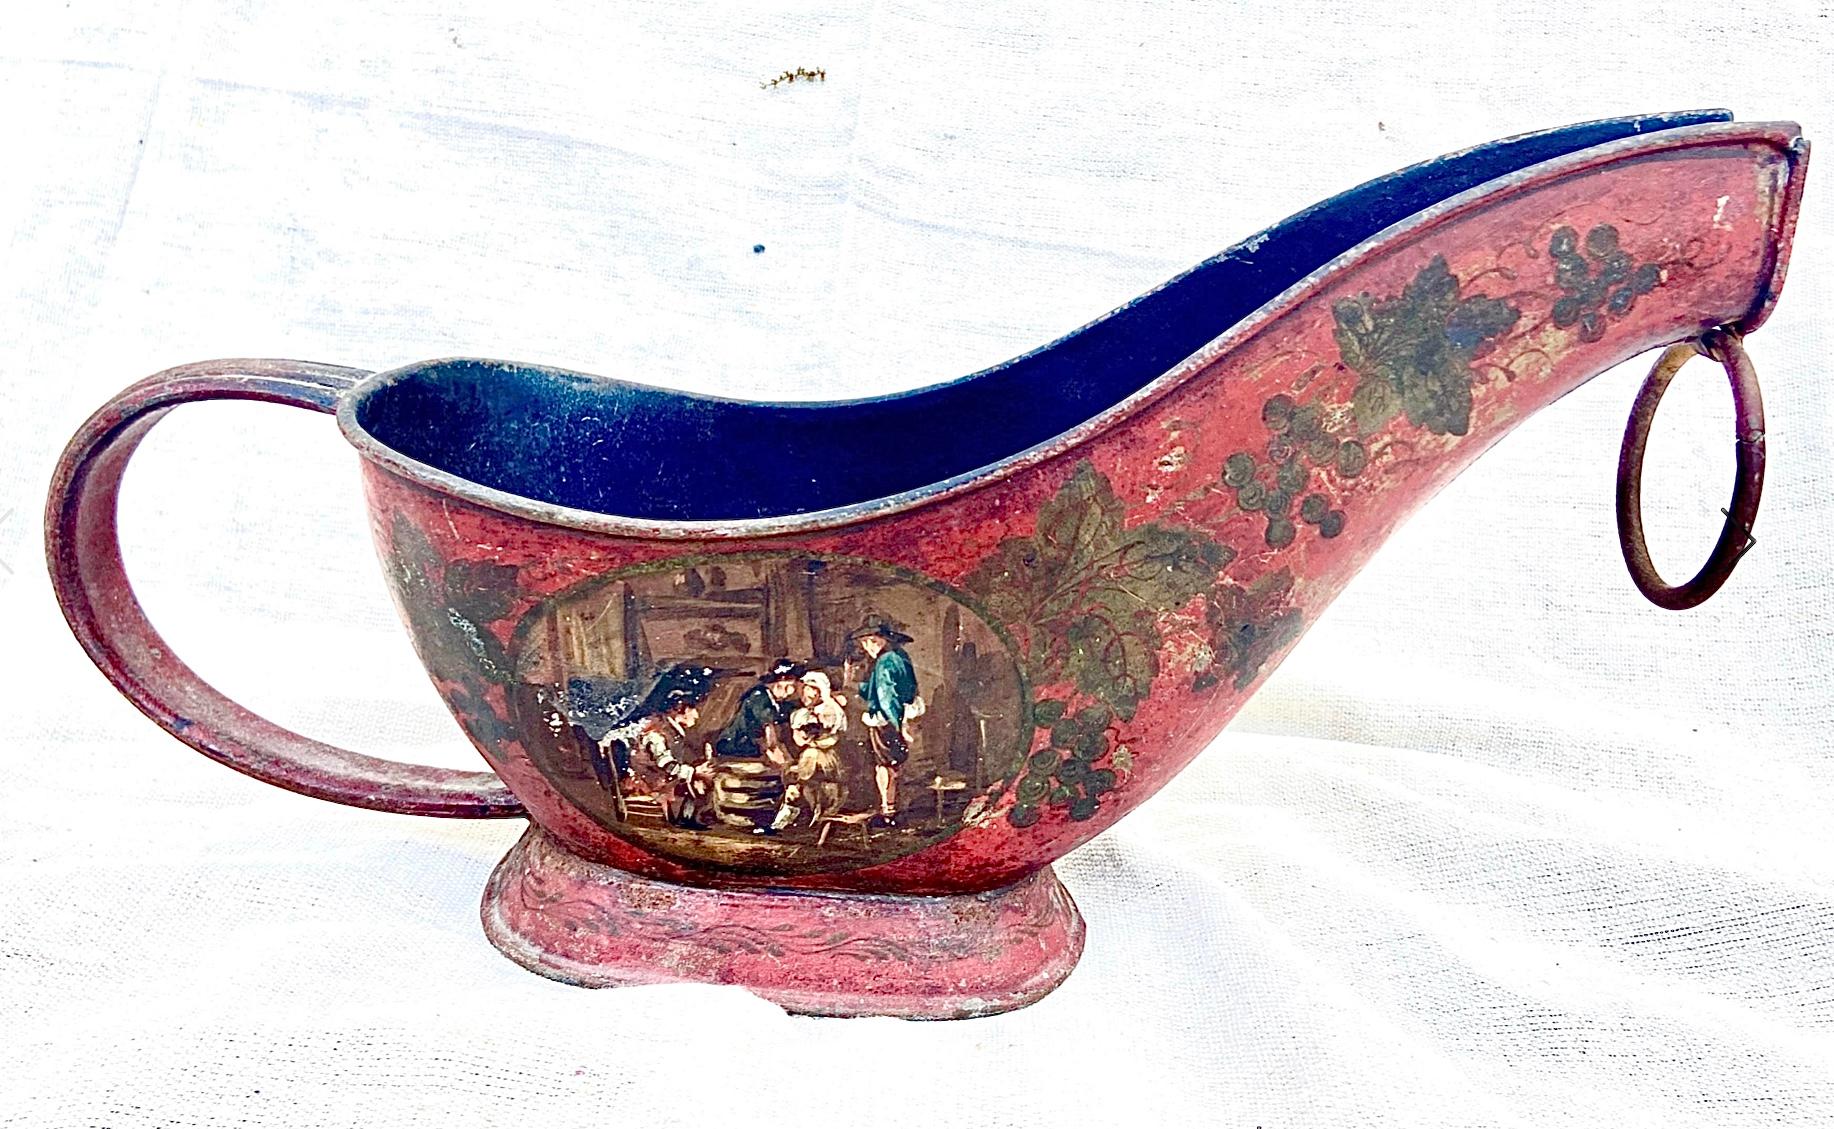 Antique French tole wine bottle holder. Background color is a deep red with painted on grapes, leaves, and French tavern scenes. Caddy has a large handle and ring at spout to enhance pouring of wine.